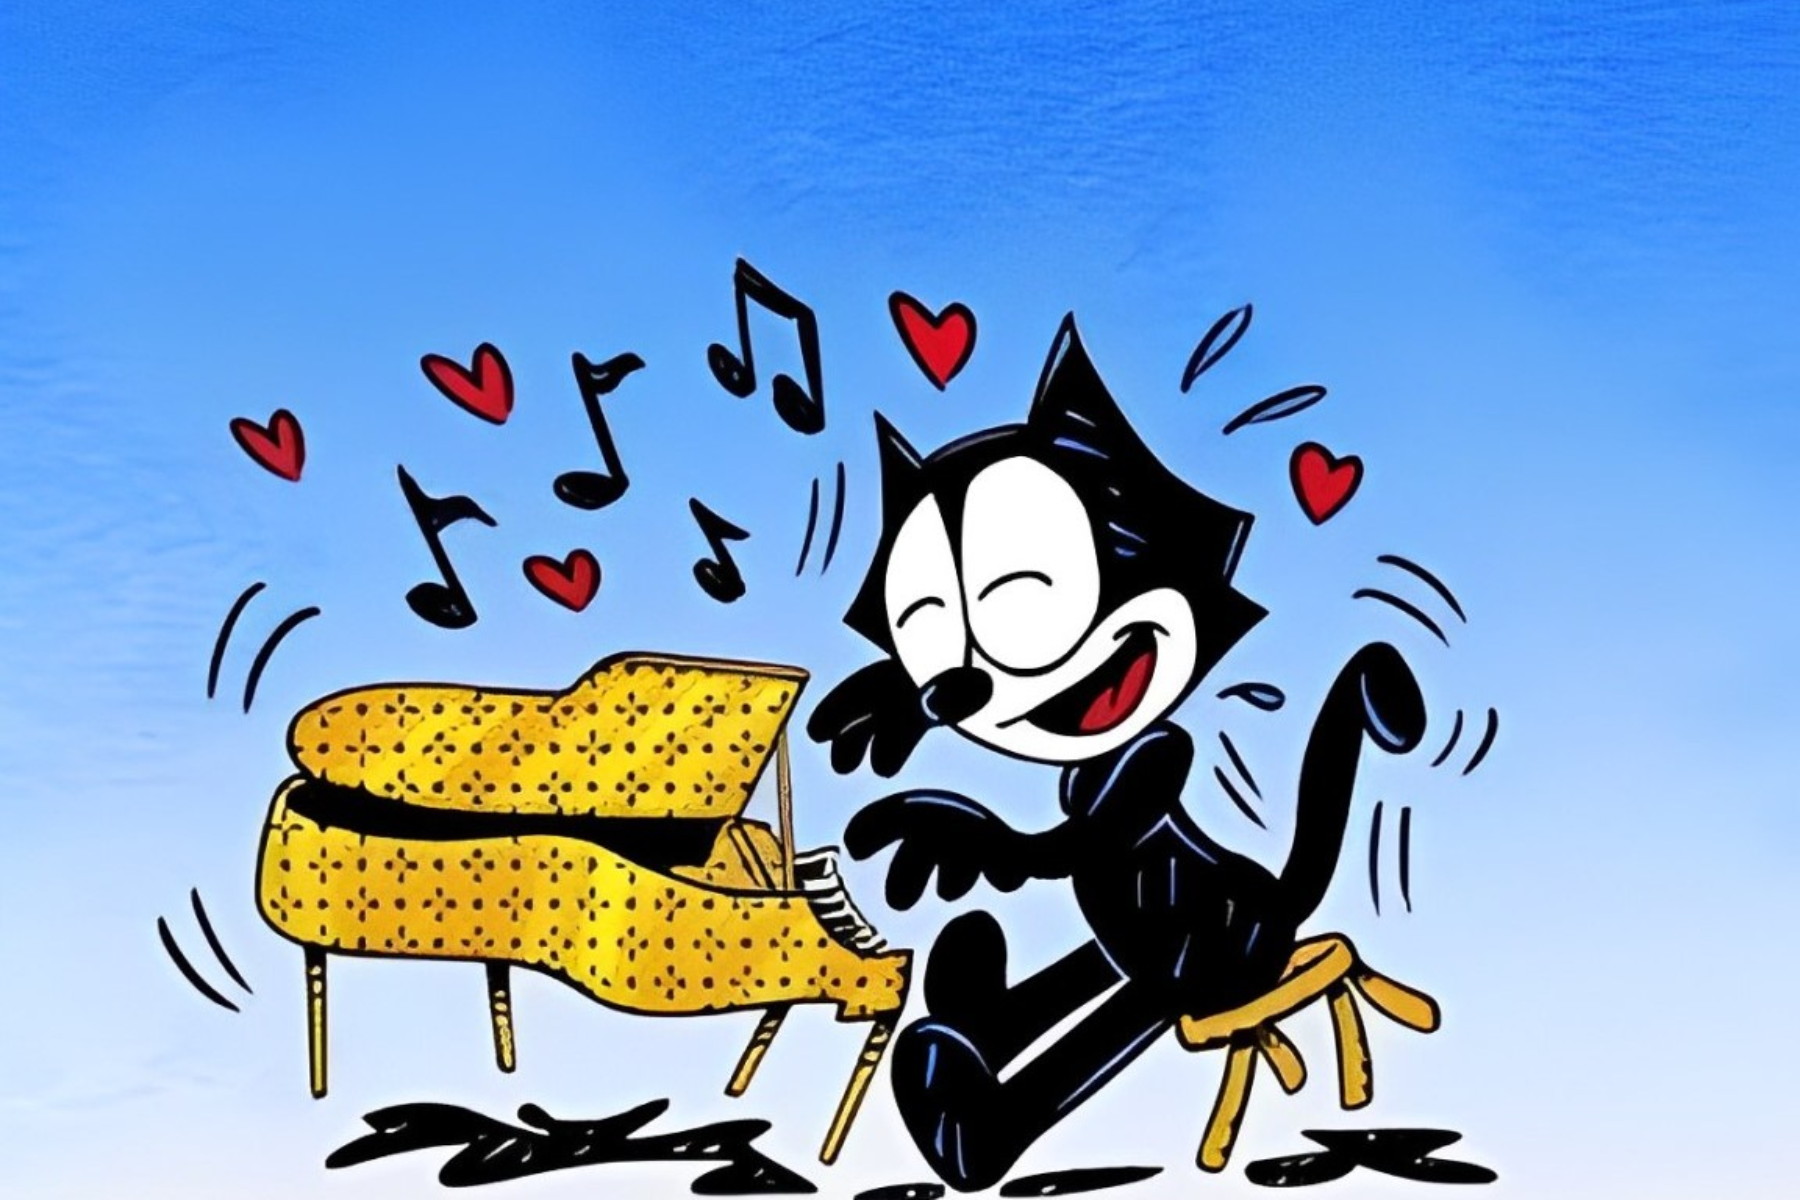 Felix the Cat is playing keyboard